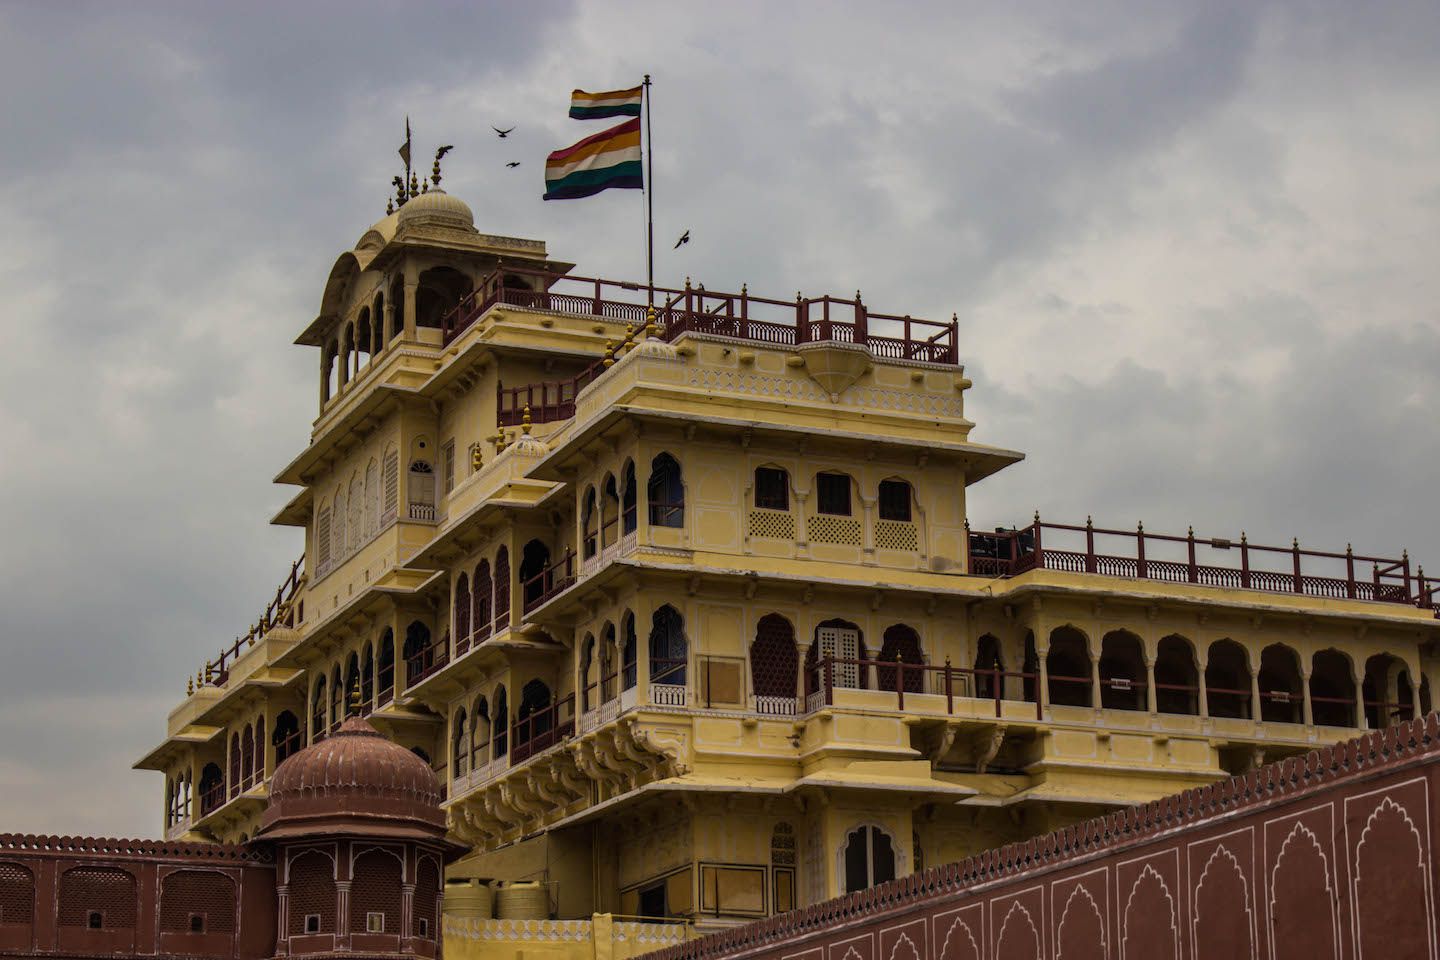 Side view of the Jaipur City Palace, India